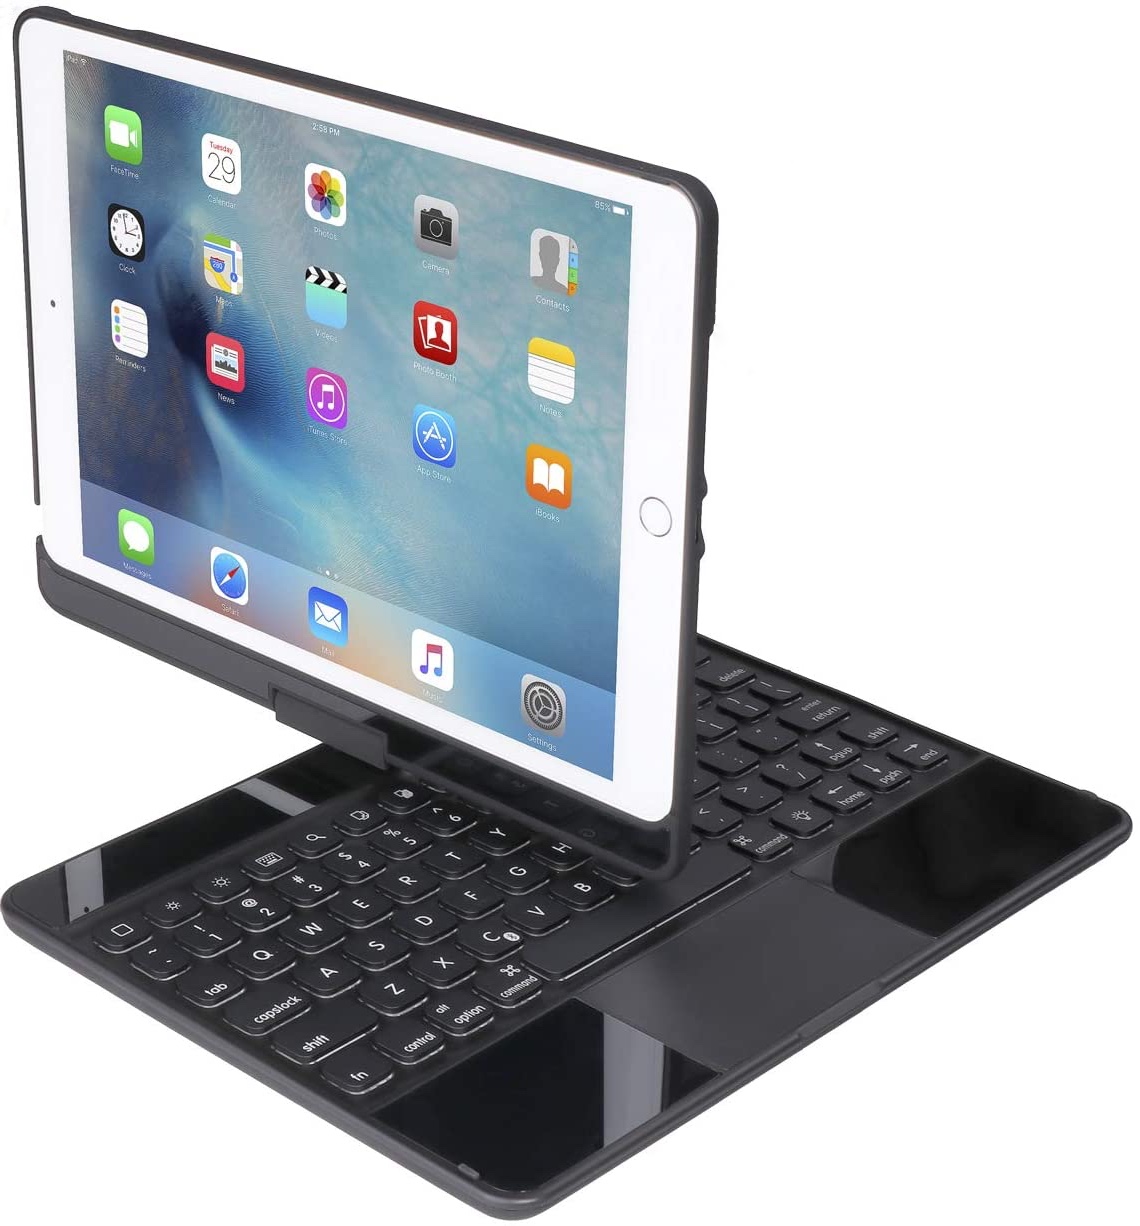 1585341662 944 The best trackpad keyboard cases for iPad in 2020